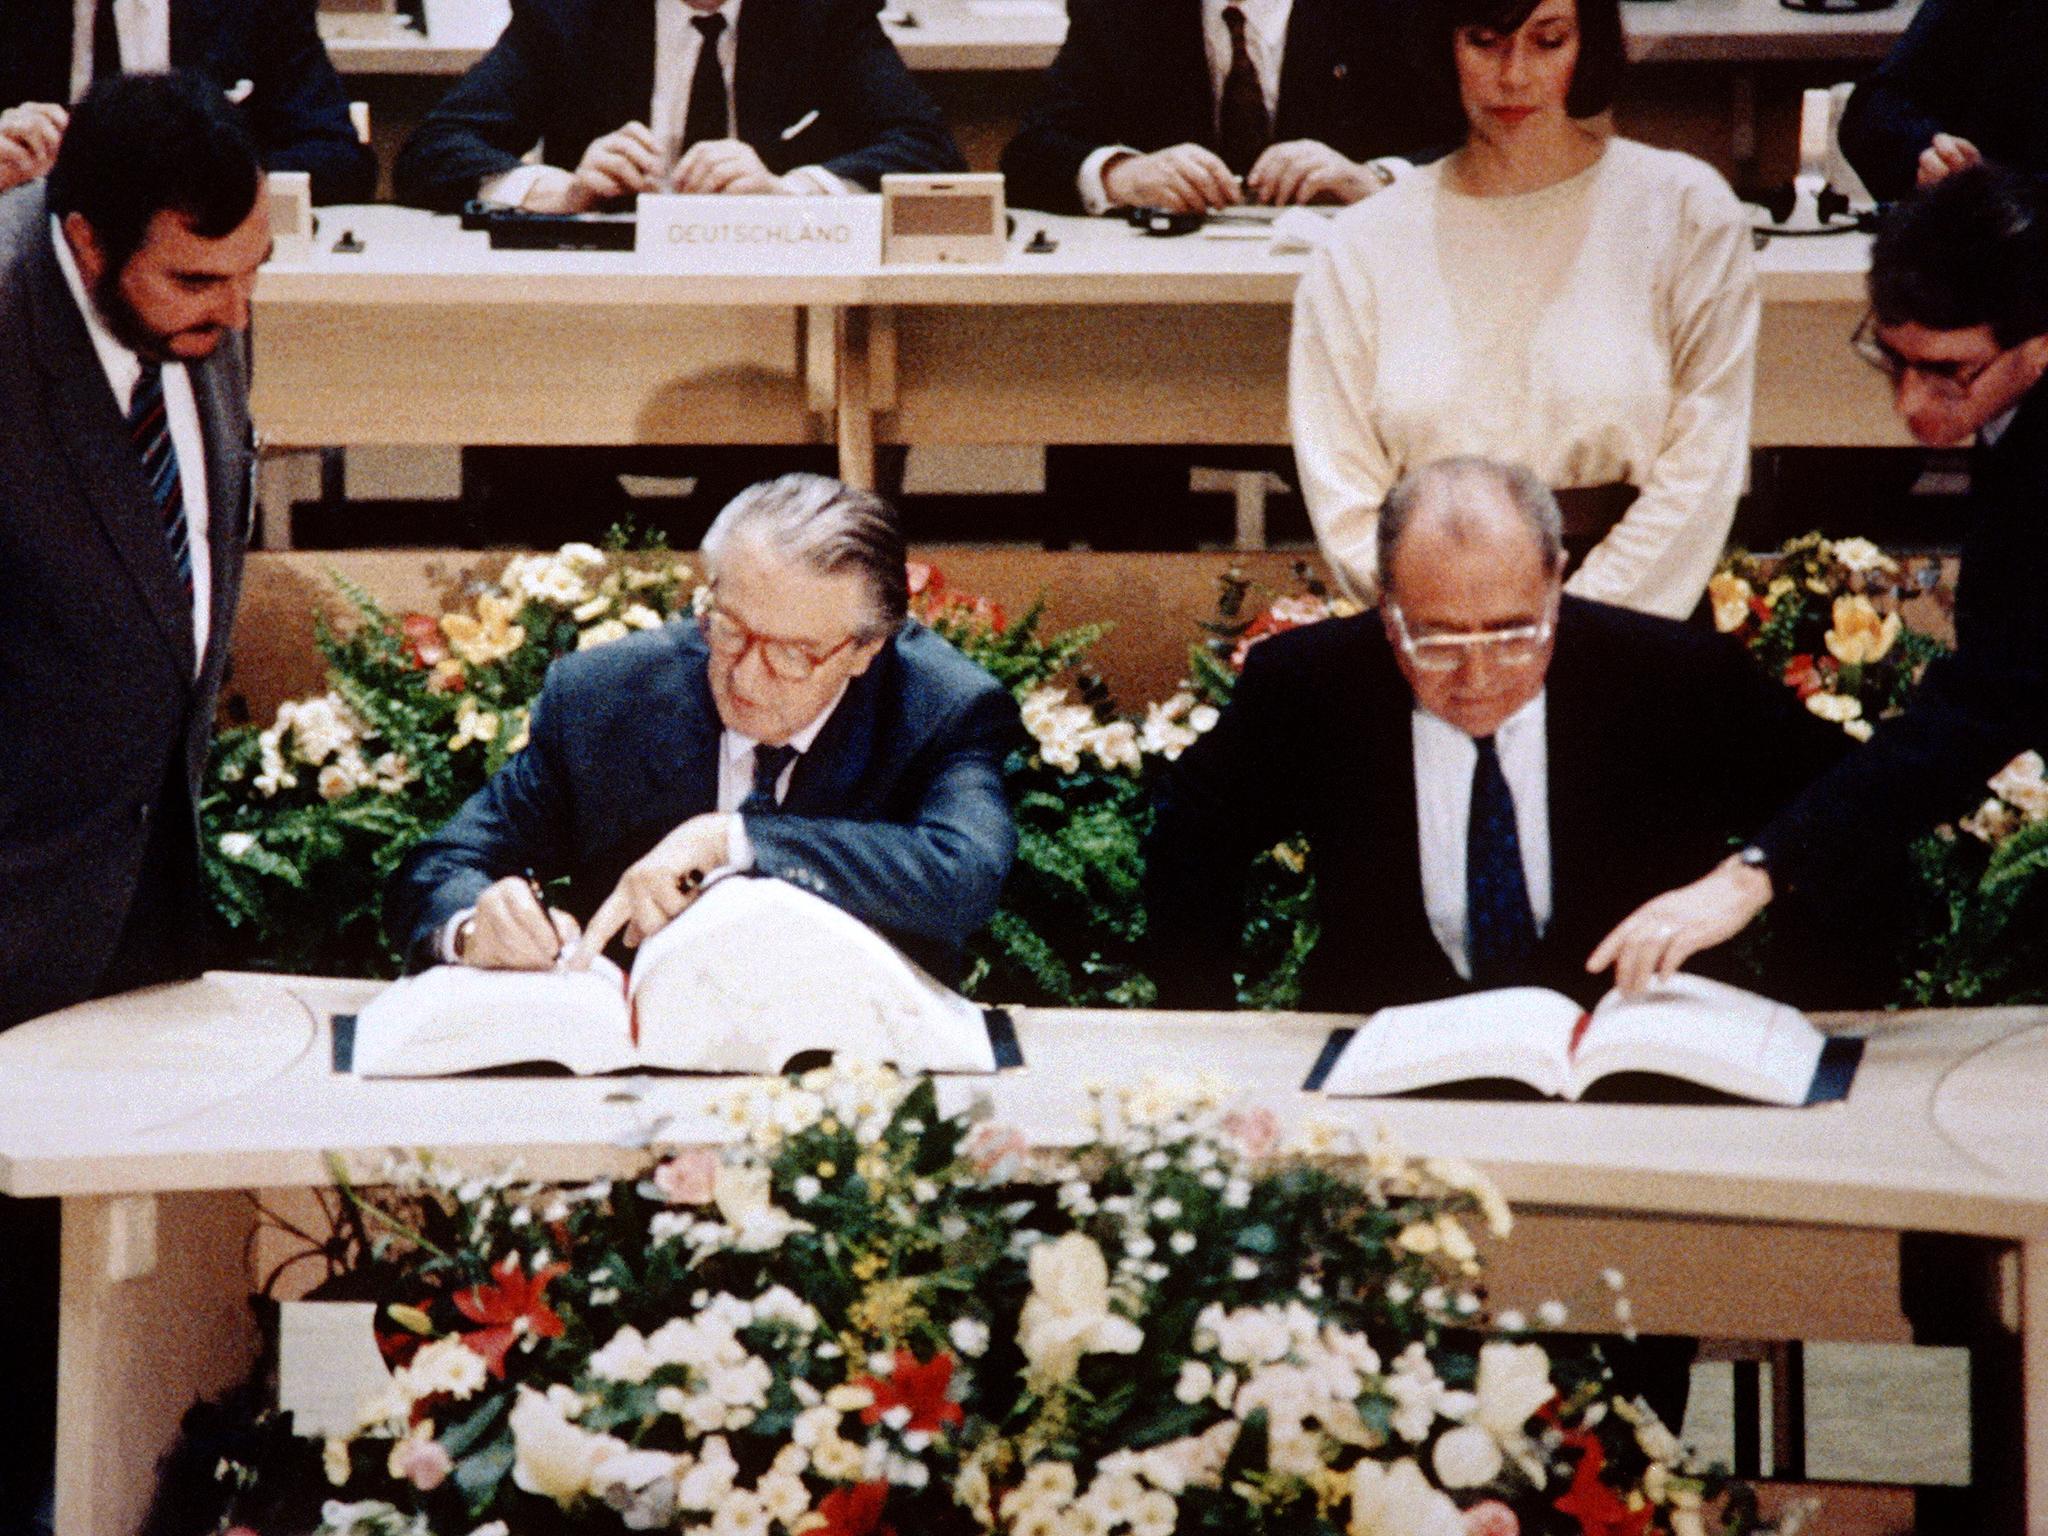 The former foreign affairs and economy ministers of France, Roland Dumas (left) and Pierre Beregovoy sign the Maastricht treaty in 1992